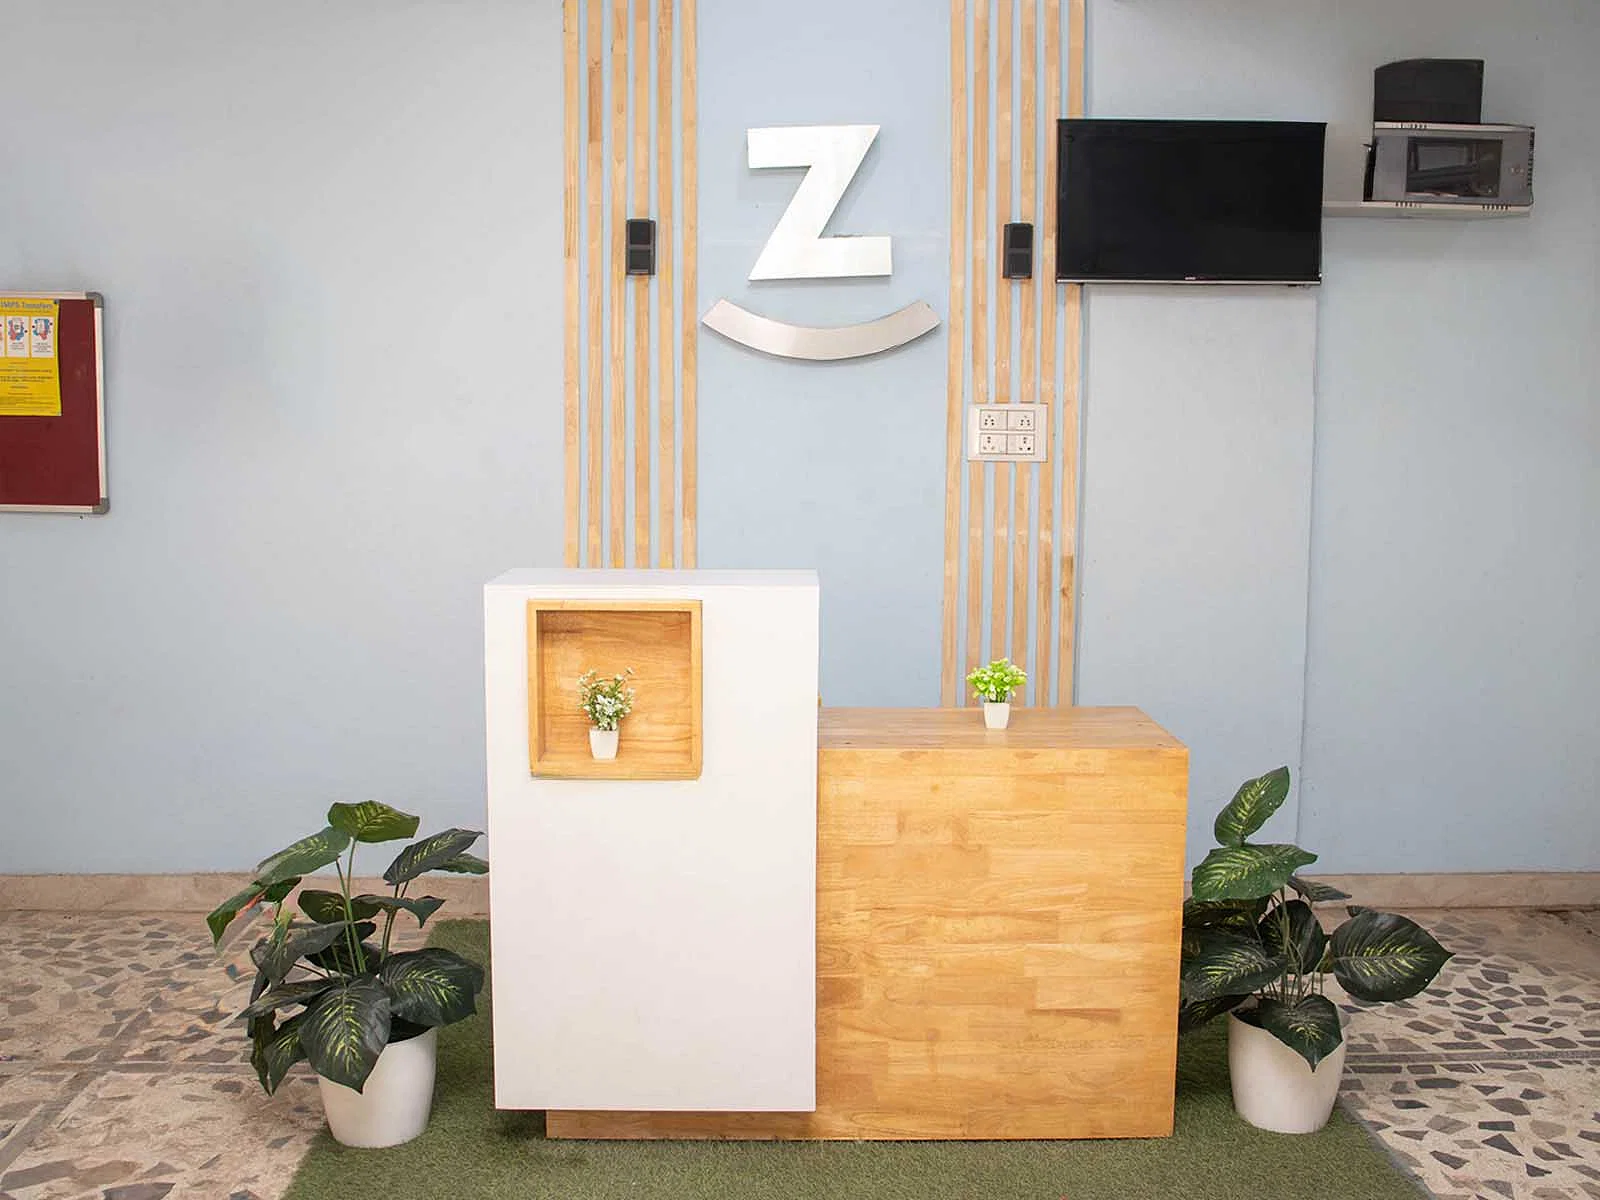 fully furnished Zolo single rooms for rent near me-check out now-Zolo Sterling